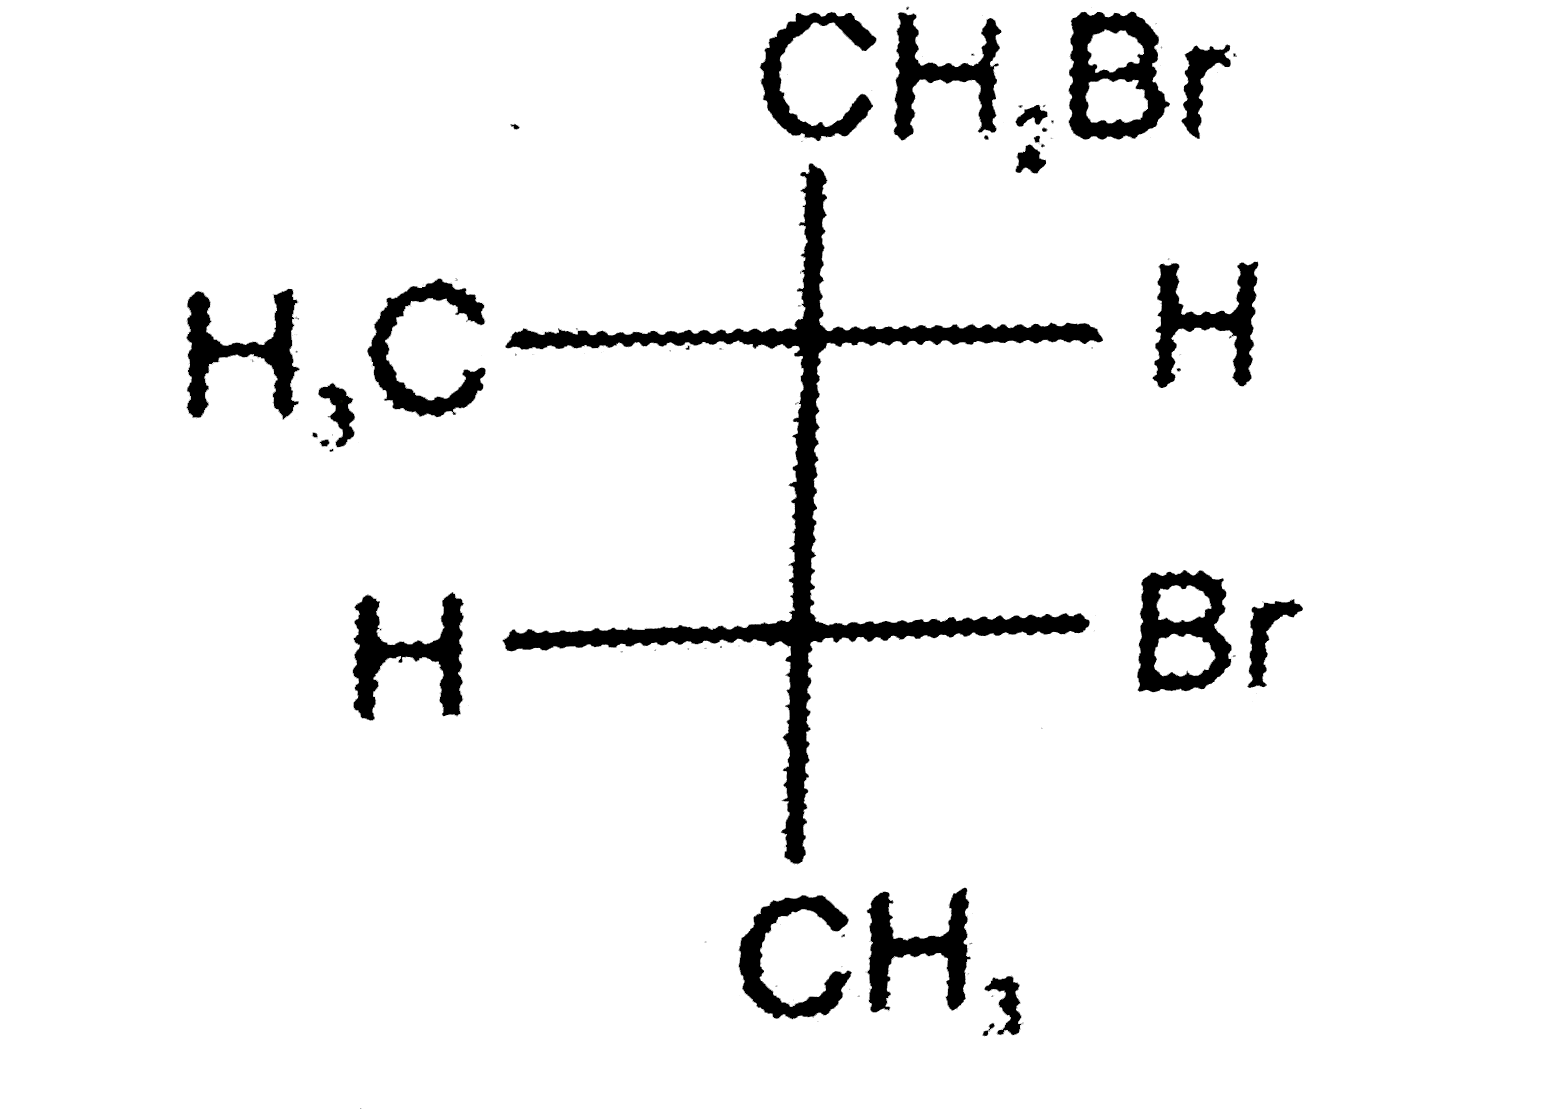 The R/S designation for the following stereoisomers of 1,3Dibromo2m